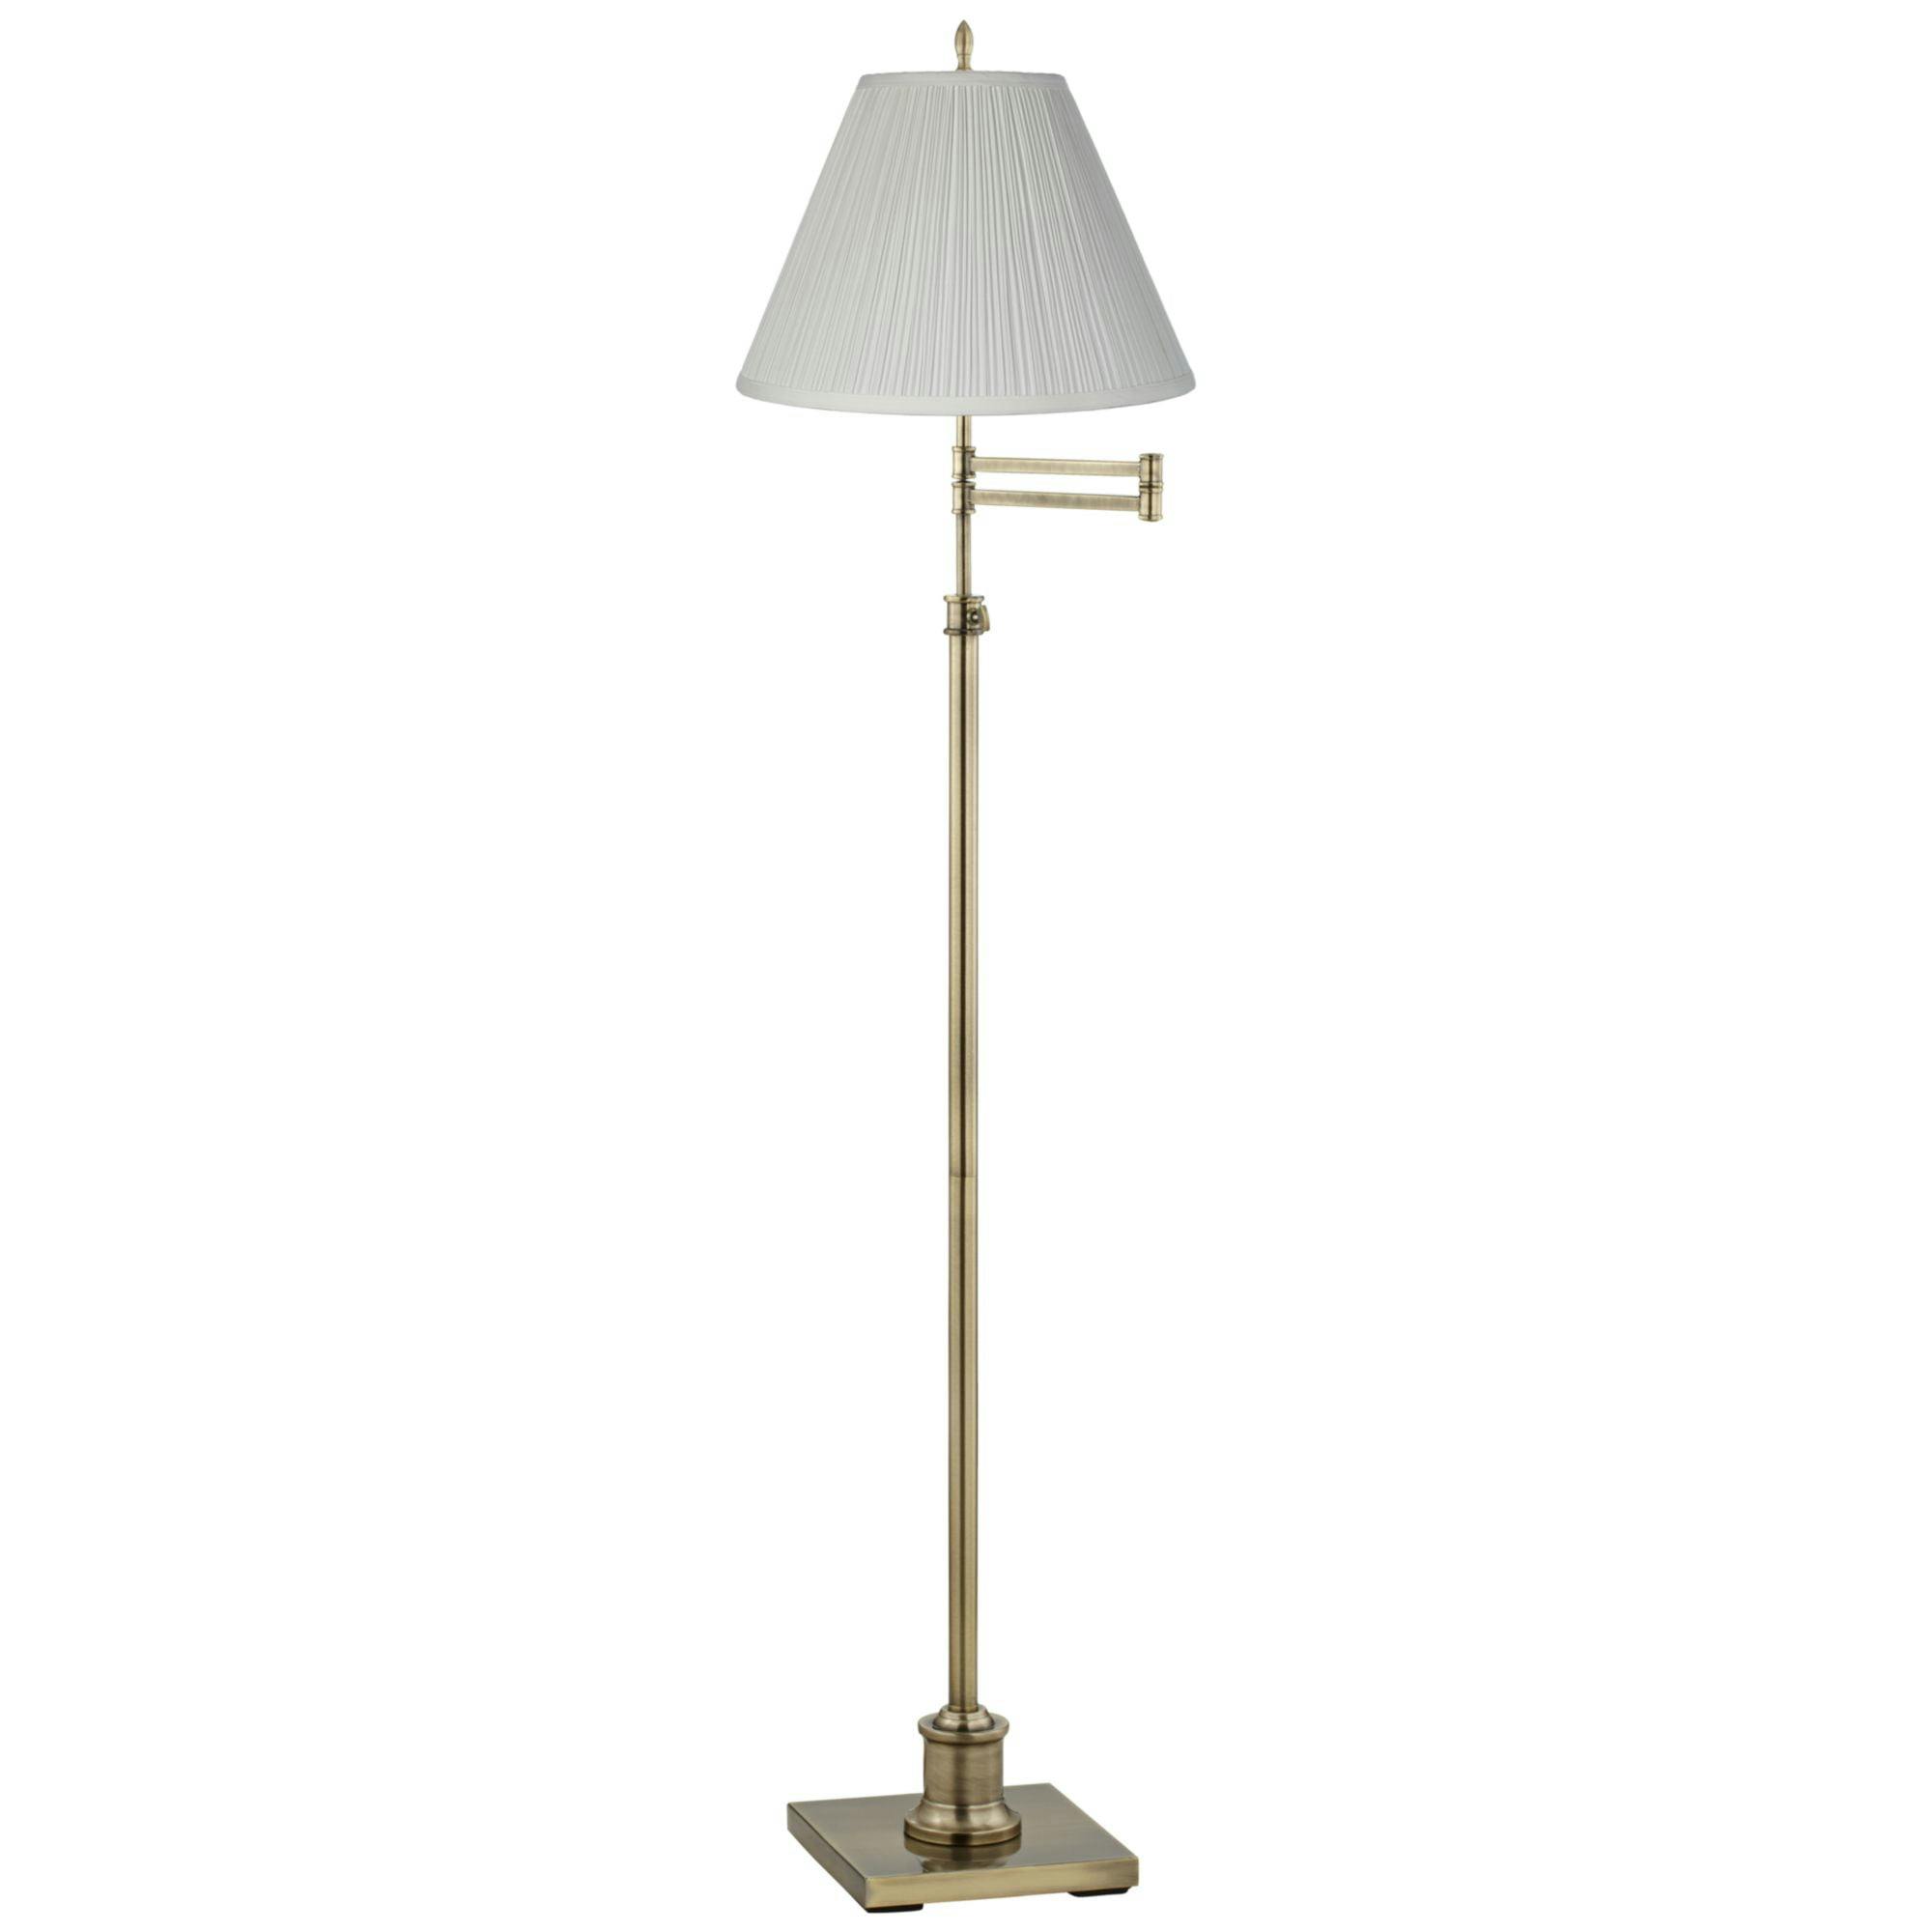 Westbury Brass Swing Arm Floor Lamp with White Pleated Shade